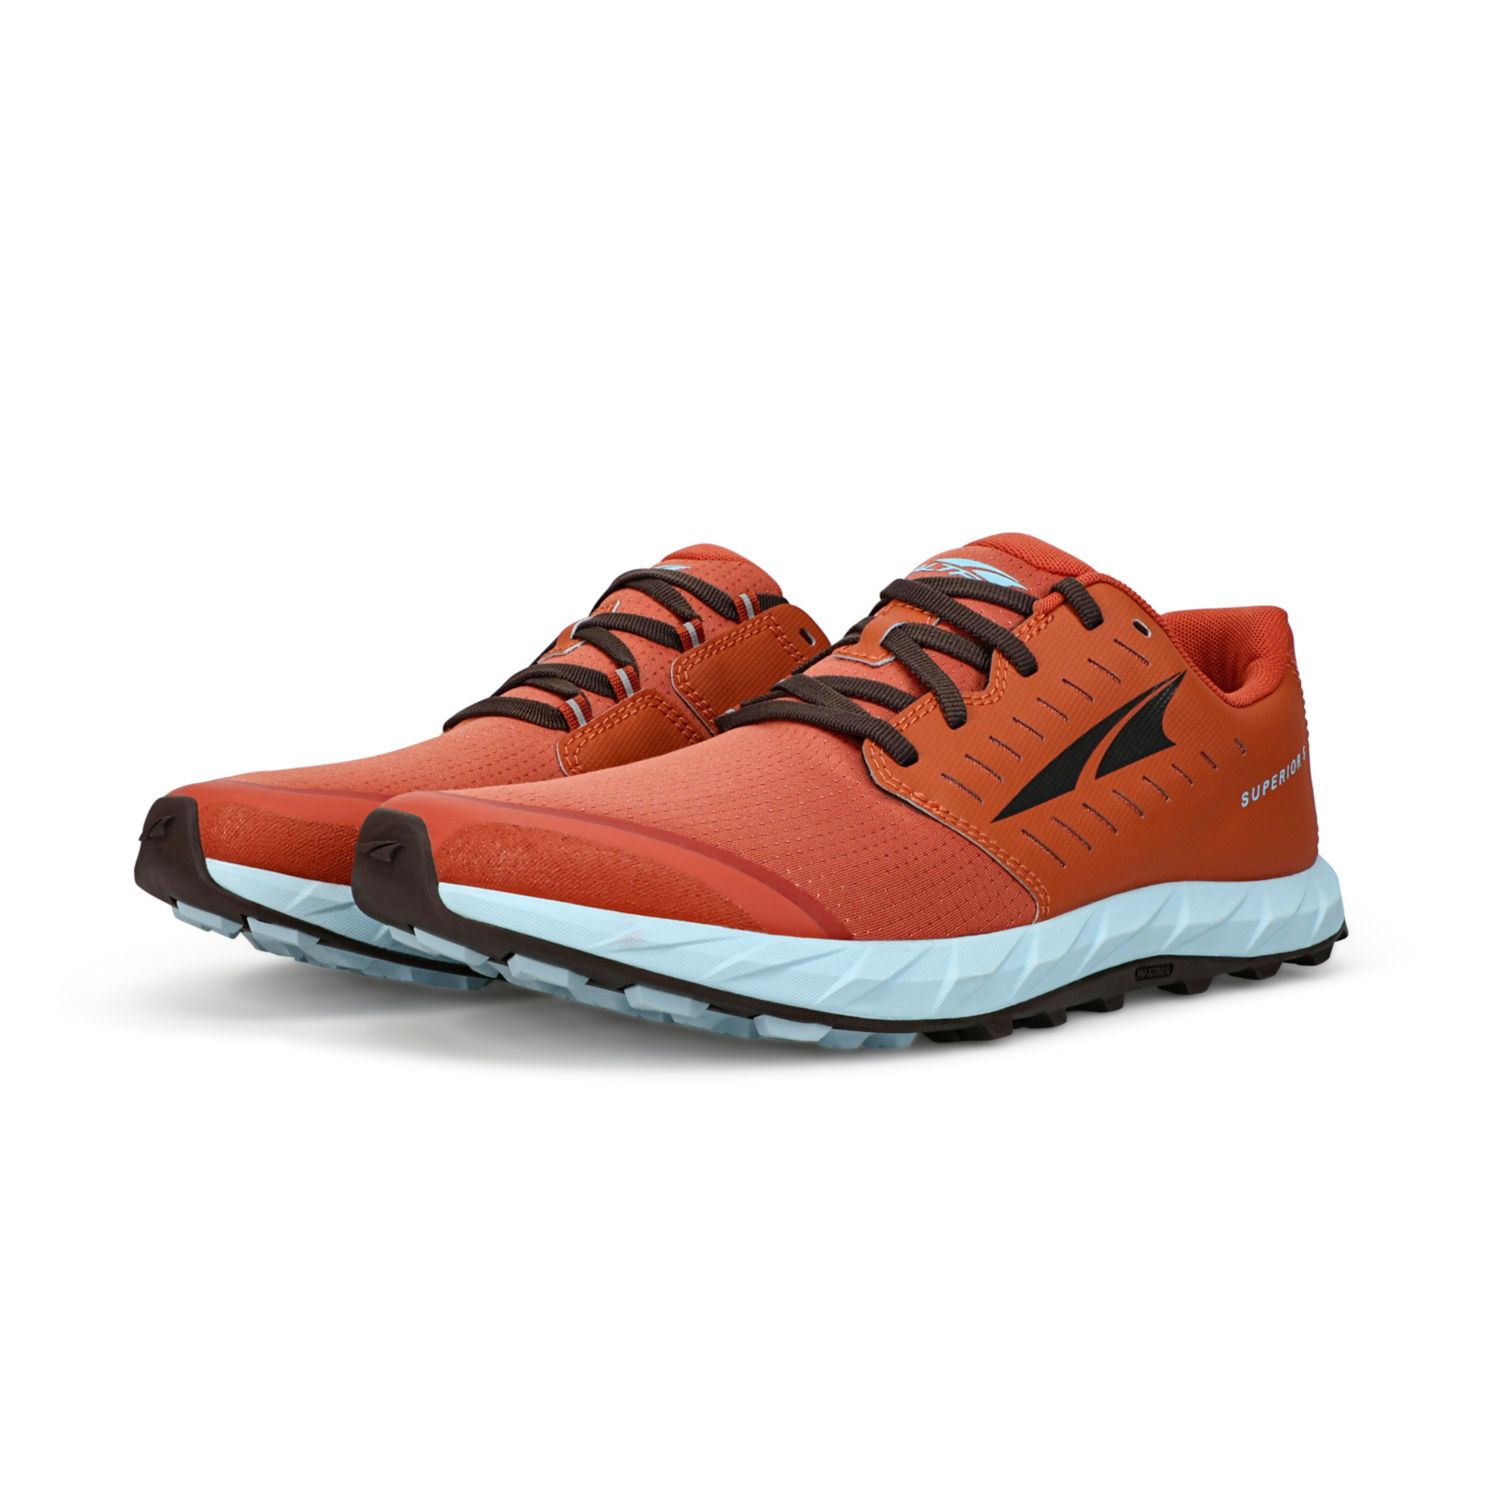 Red Altra Superior 5 Women's Trail Running Shoes | Ireland-83092479